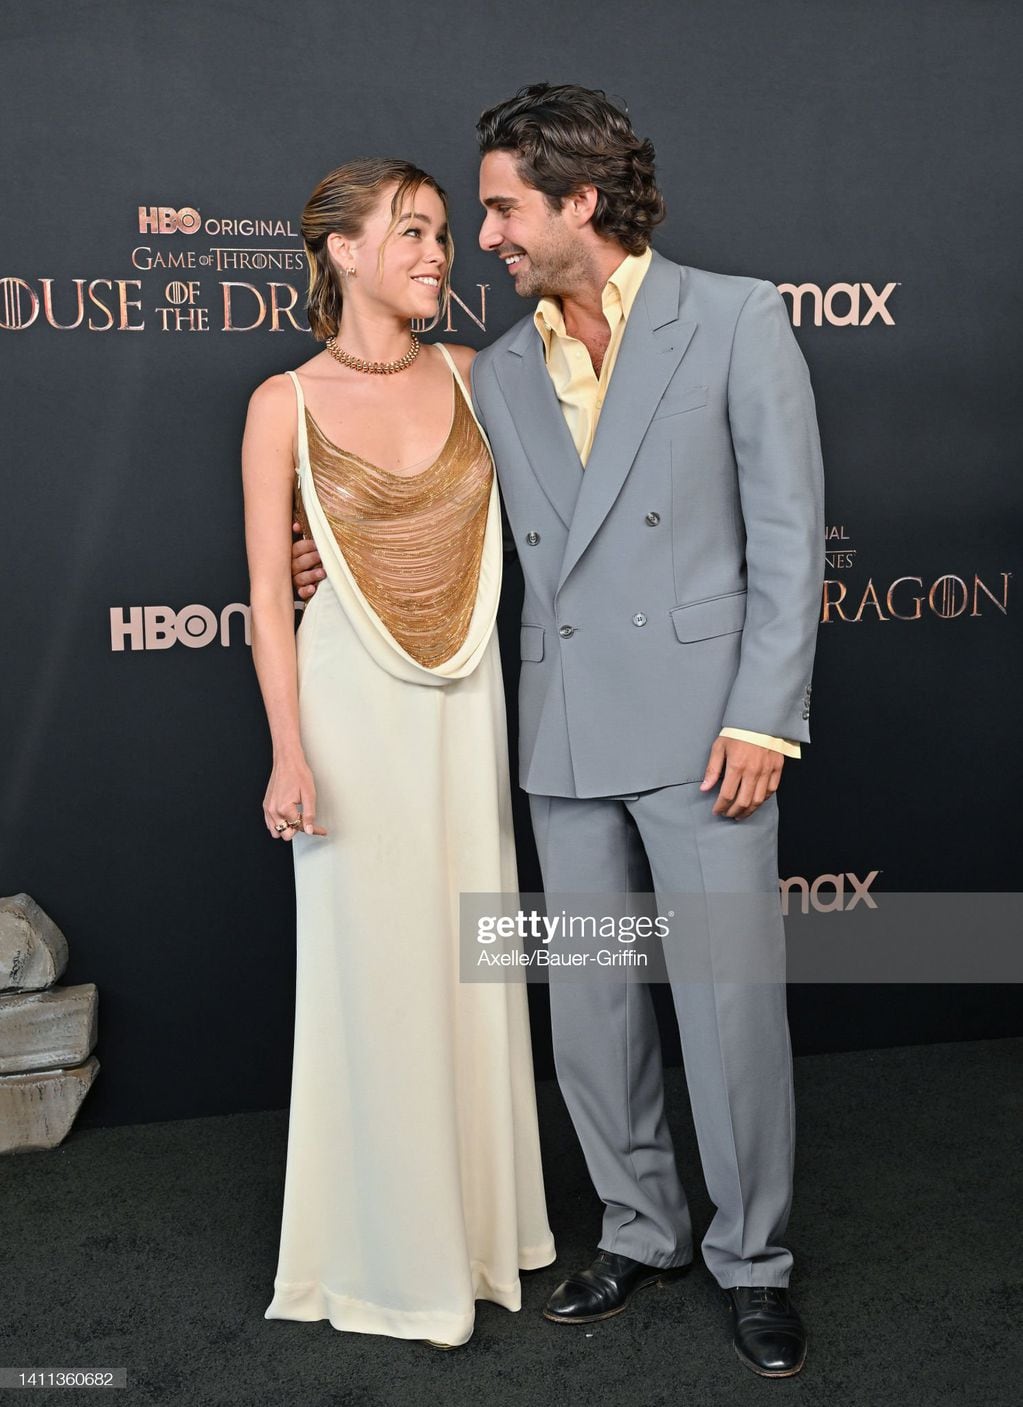 LOS ANGELES, CALIFORNIA - JULY 27: Milly Alcock and Fabian Frankel attend HBO Original Drama Series "House Of The Dragon" World Premiere at Academy Museum of Motion Pictures on July 27, 2022 in Los Angeles, California. (Photo by Axelle/Bauer-Griffin/Getty Images)